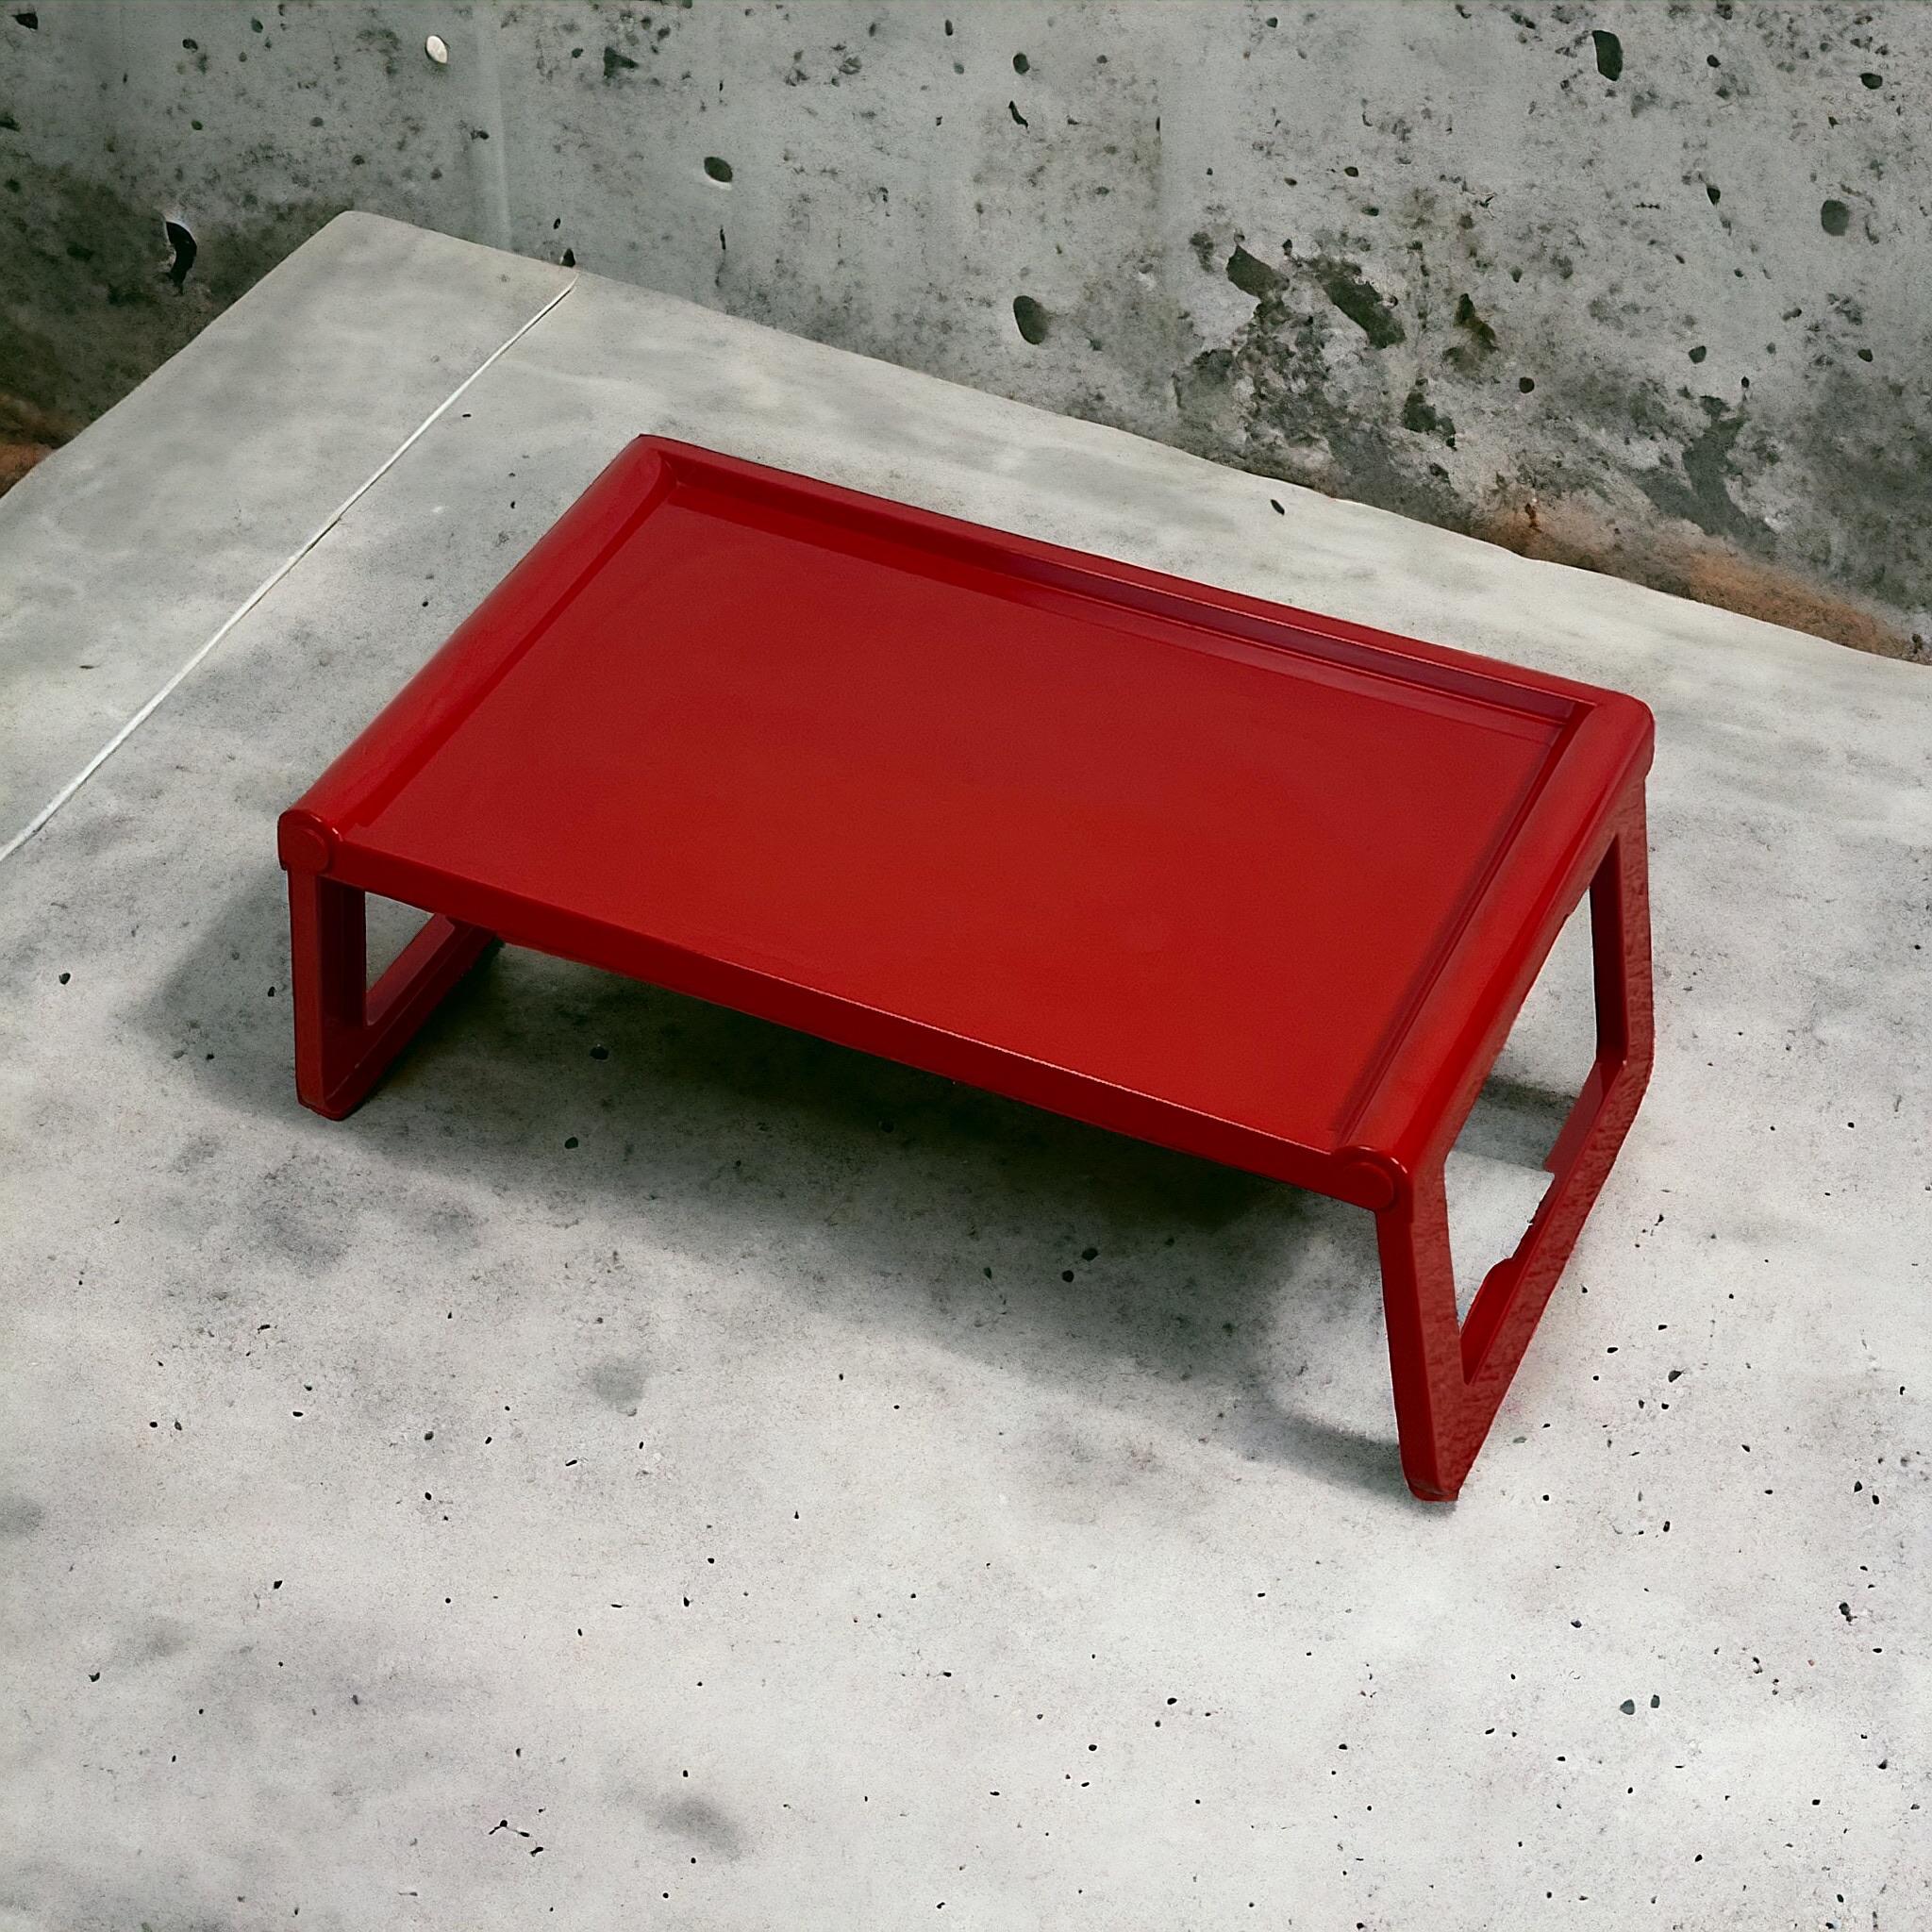 Iconic Tray Table 'Jolly' by Luigi Massoni for Guzzini in Glossy Red , 1970s For Sale 2